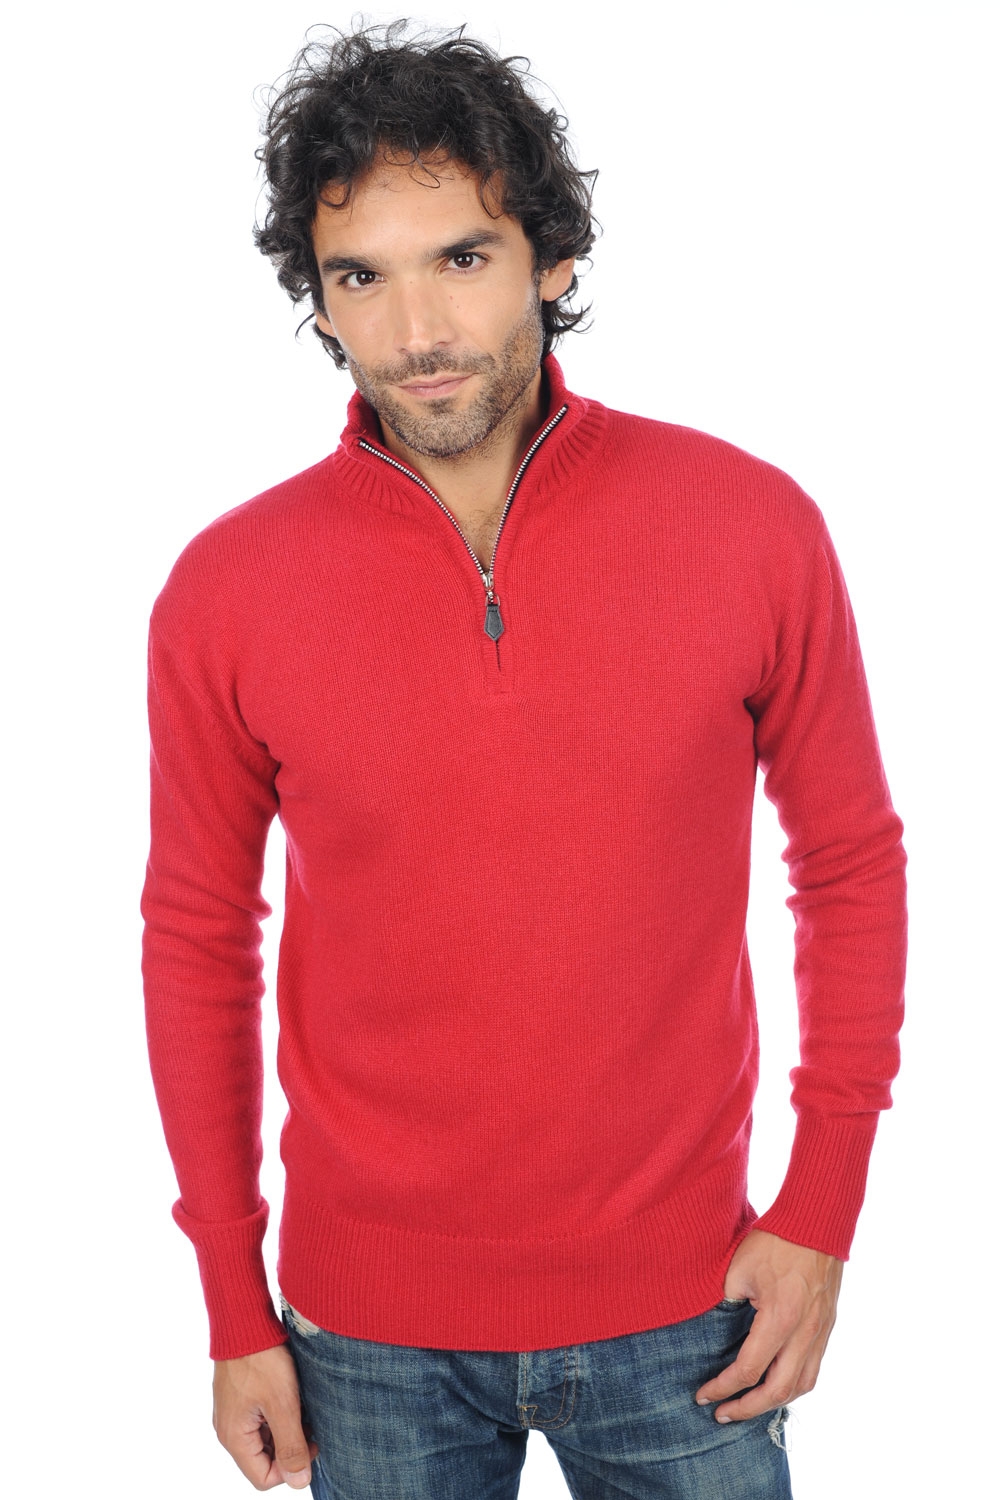 Cashmere men chunky sweater donovan blood red xl